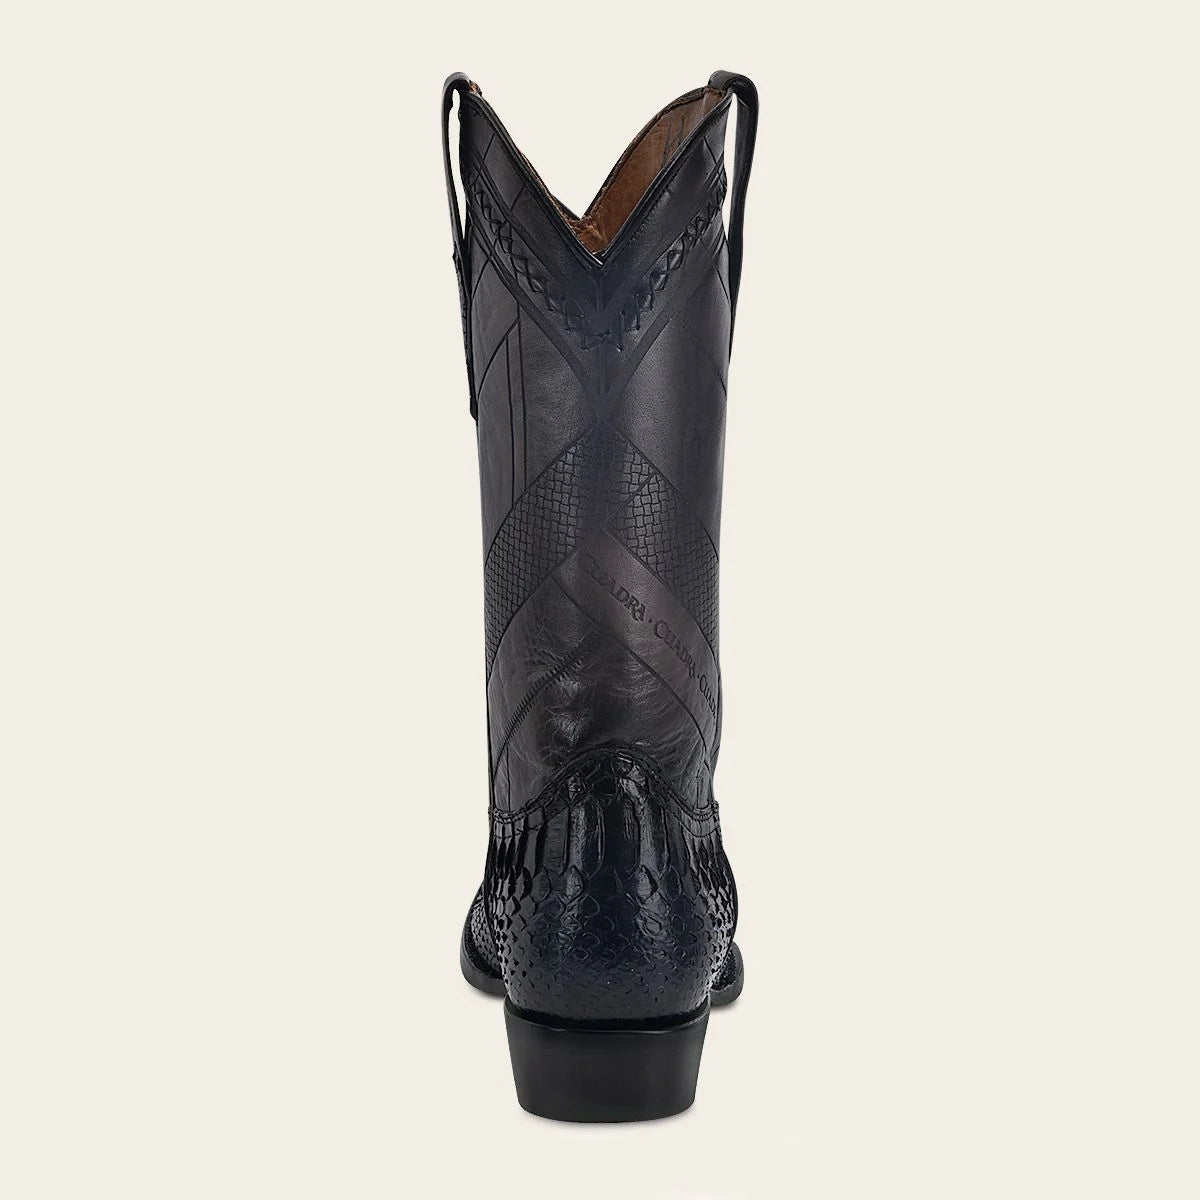 Hand-painted traditional blue python leather boot